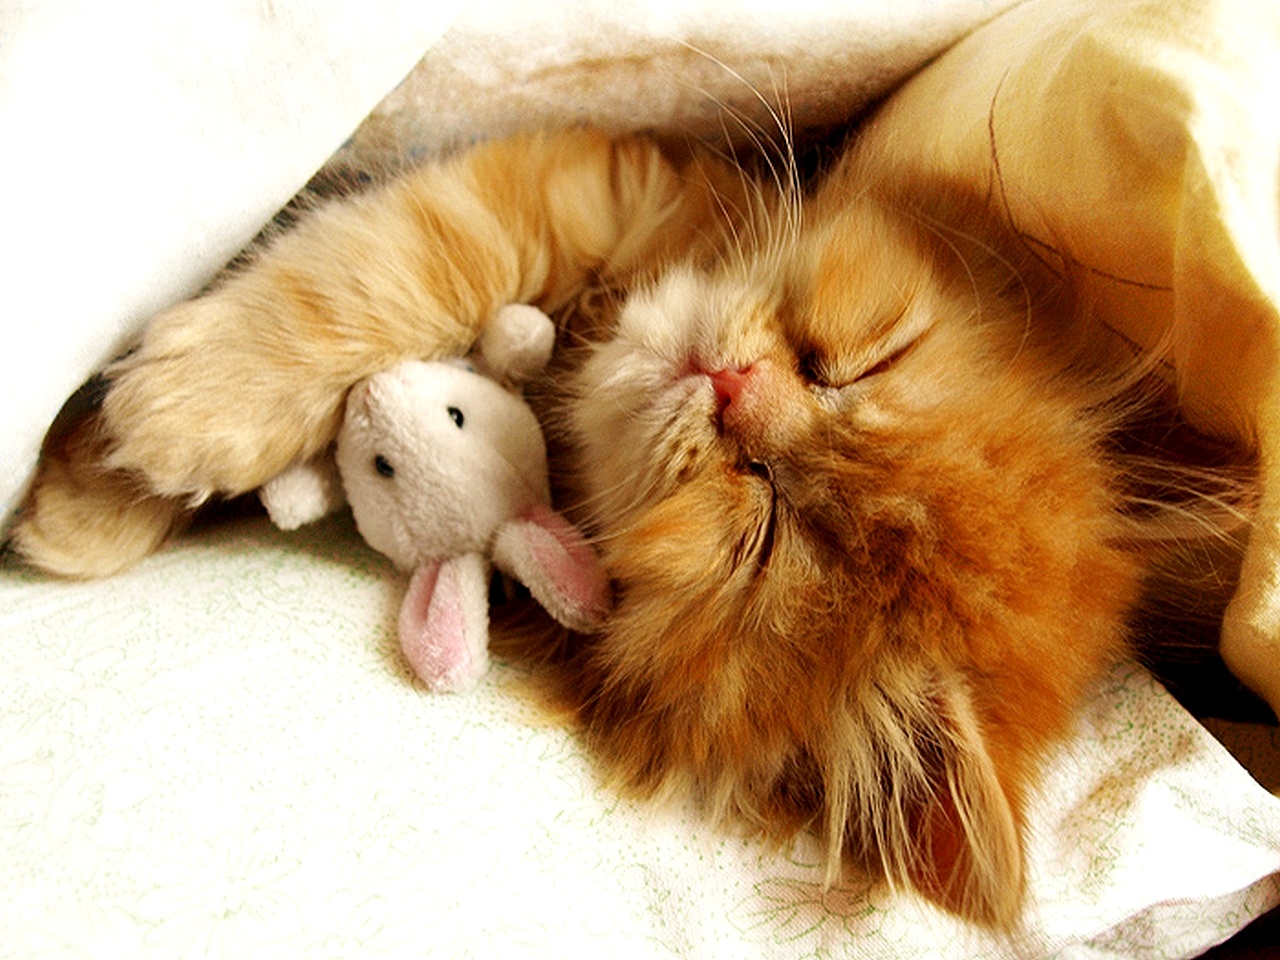 Cat cute hugging Sleeping - The Best Place to Enjoy Your Lovely Desktop